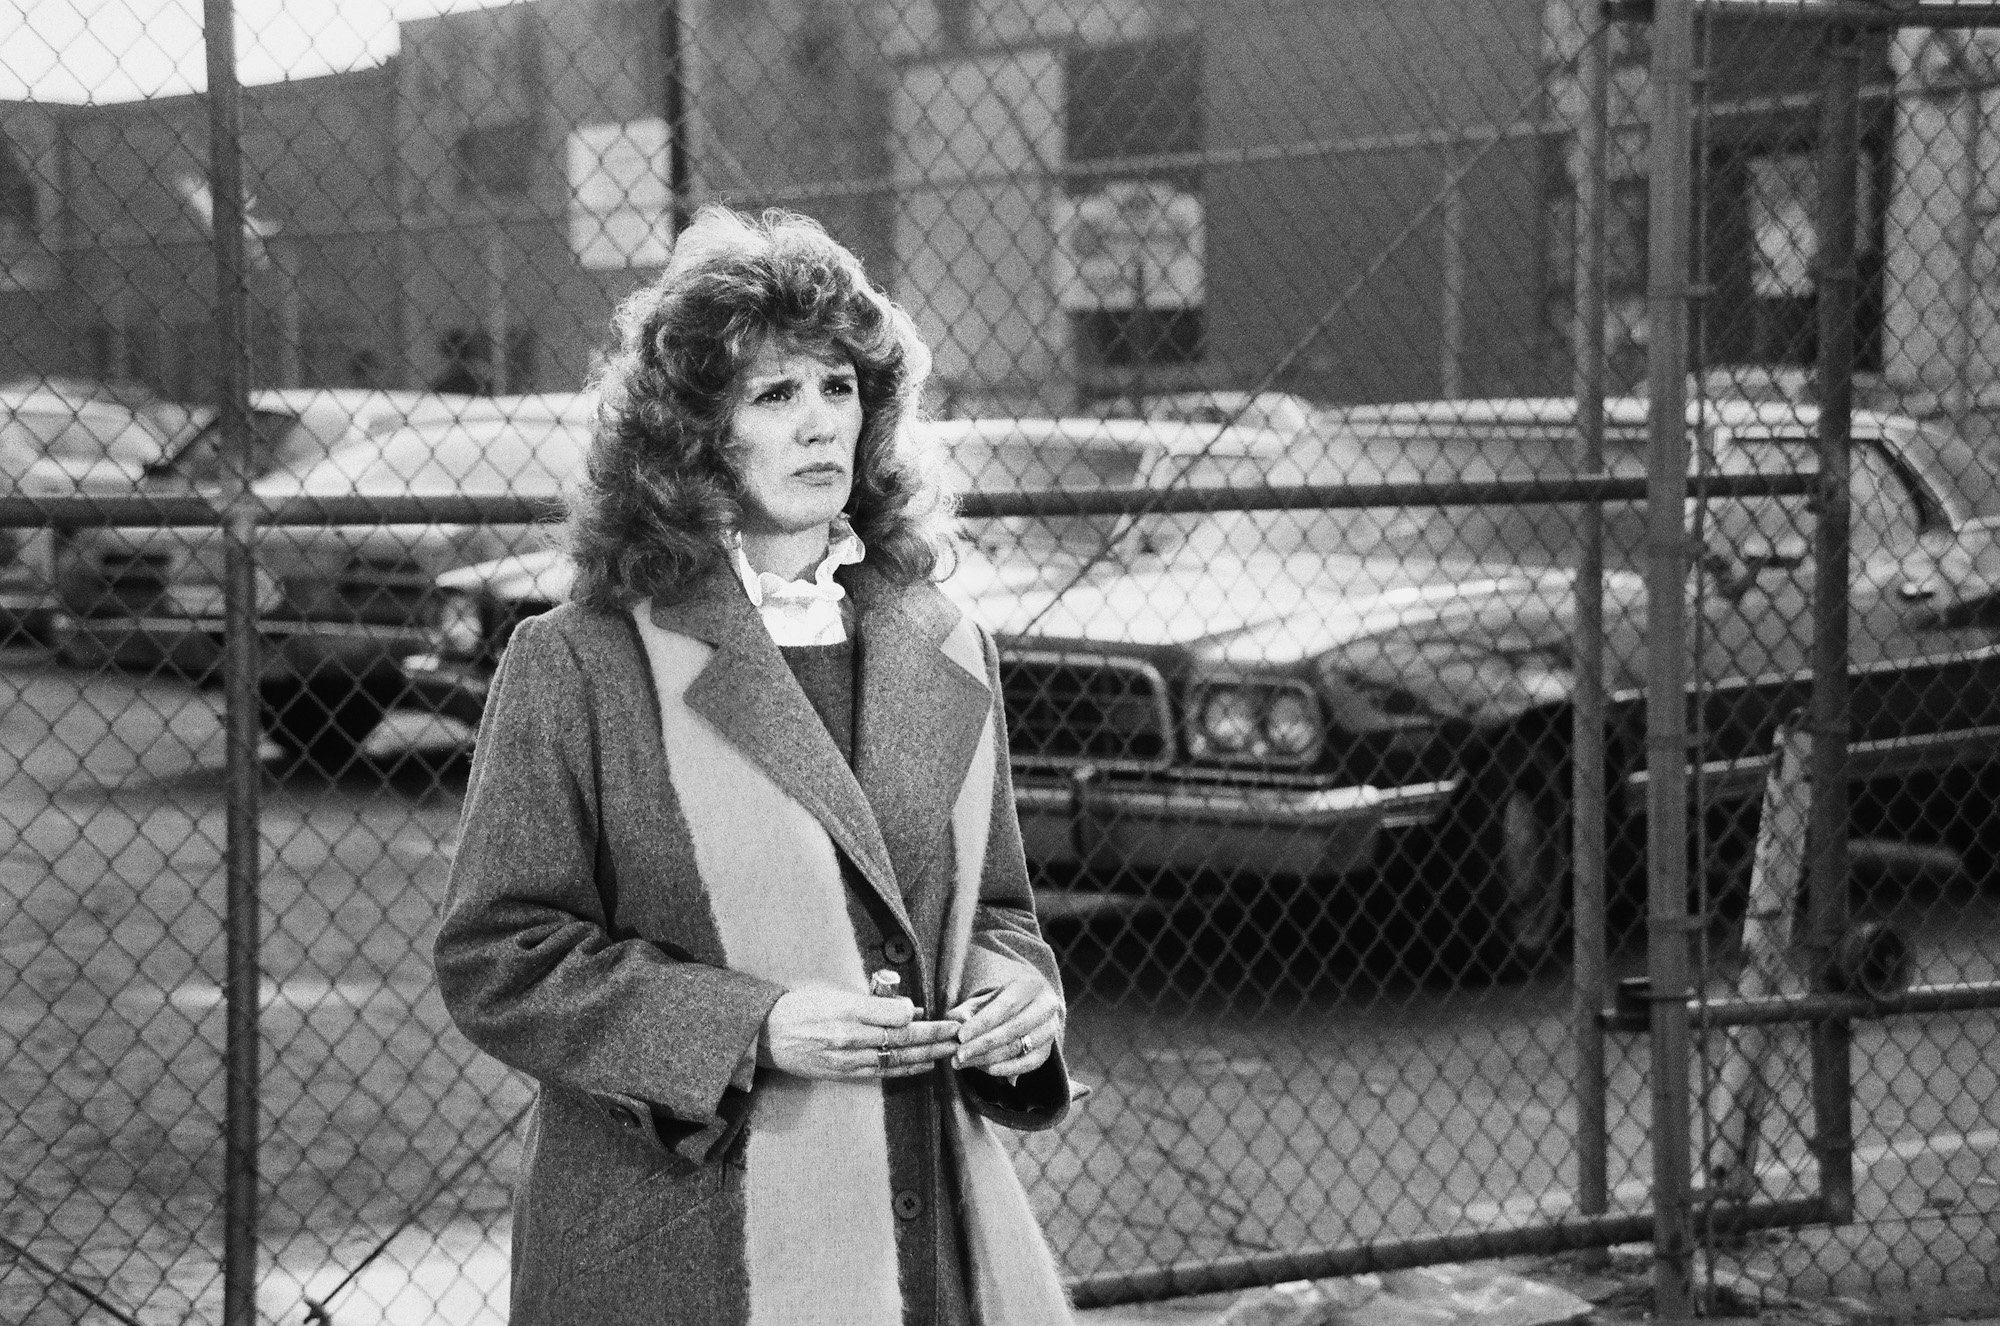 Barbara Bosson on 'Hill Street Blues' standing in front of a fenced in parking lot, in black and white